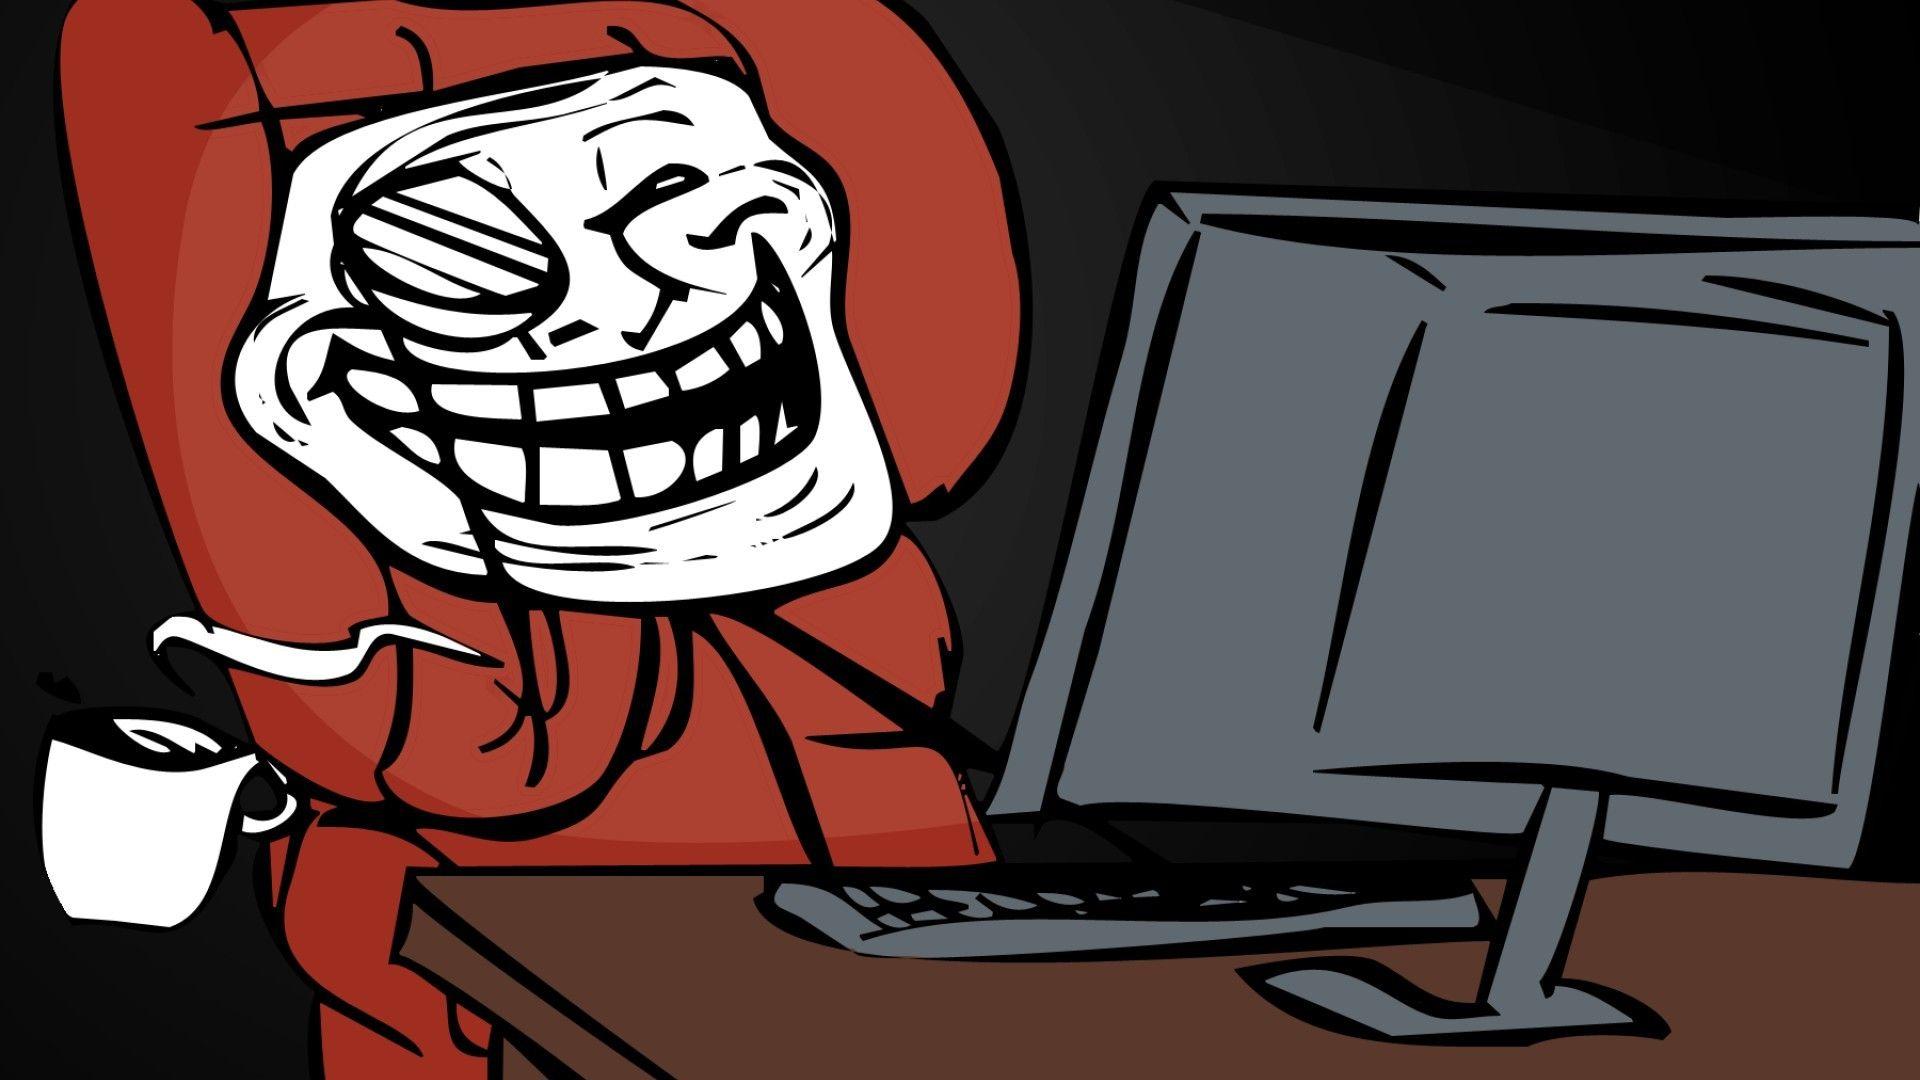 Trollface Background for PC HD Wallpaper